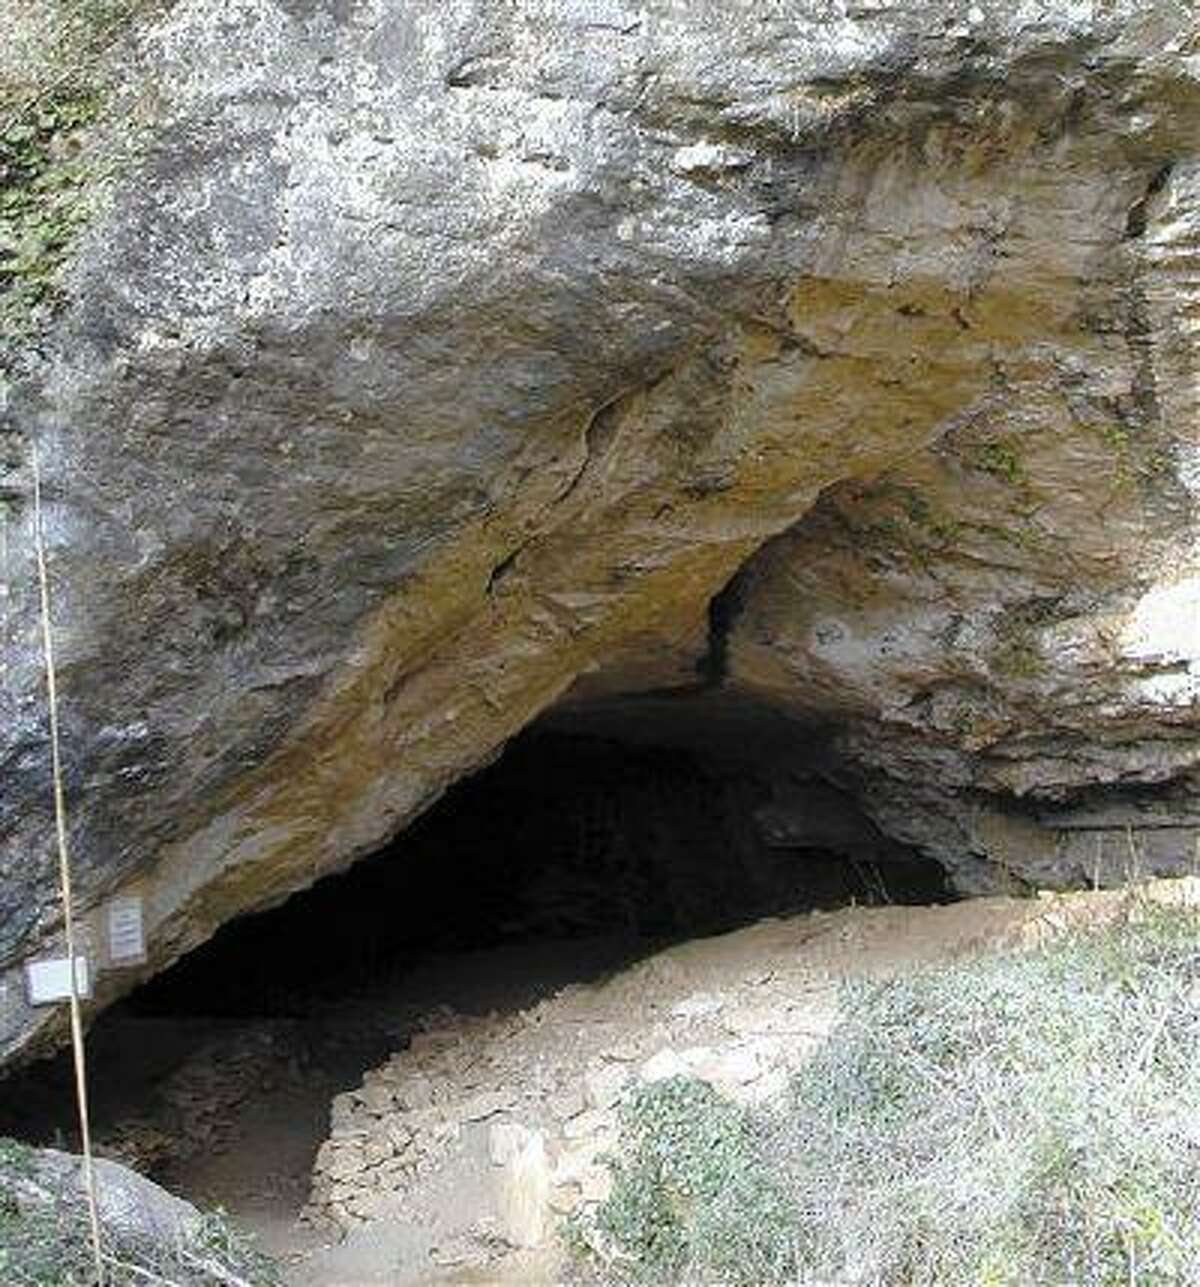 This undated photo provided Monday, Aug.12, 2013 by Pech-de-l'Aze Project shows a classic Neandertal cave site of Pech-de-l'Aze, southwestern France, where a bone tool called a lissoir was recently found. This tool was dated to approximately 50,000-years old. (Courtesy photo Pech-de-l'Azé Project/AP)